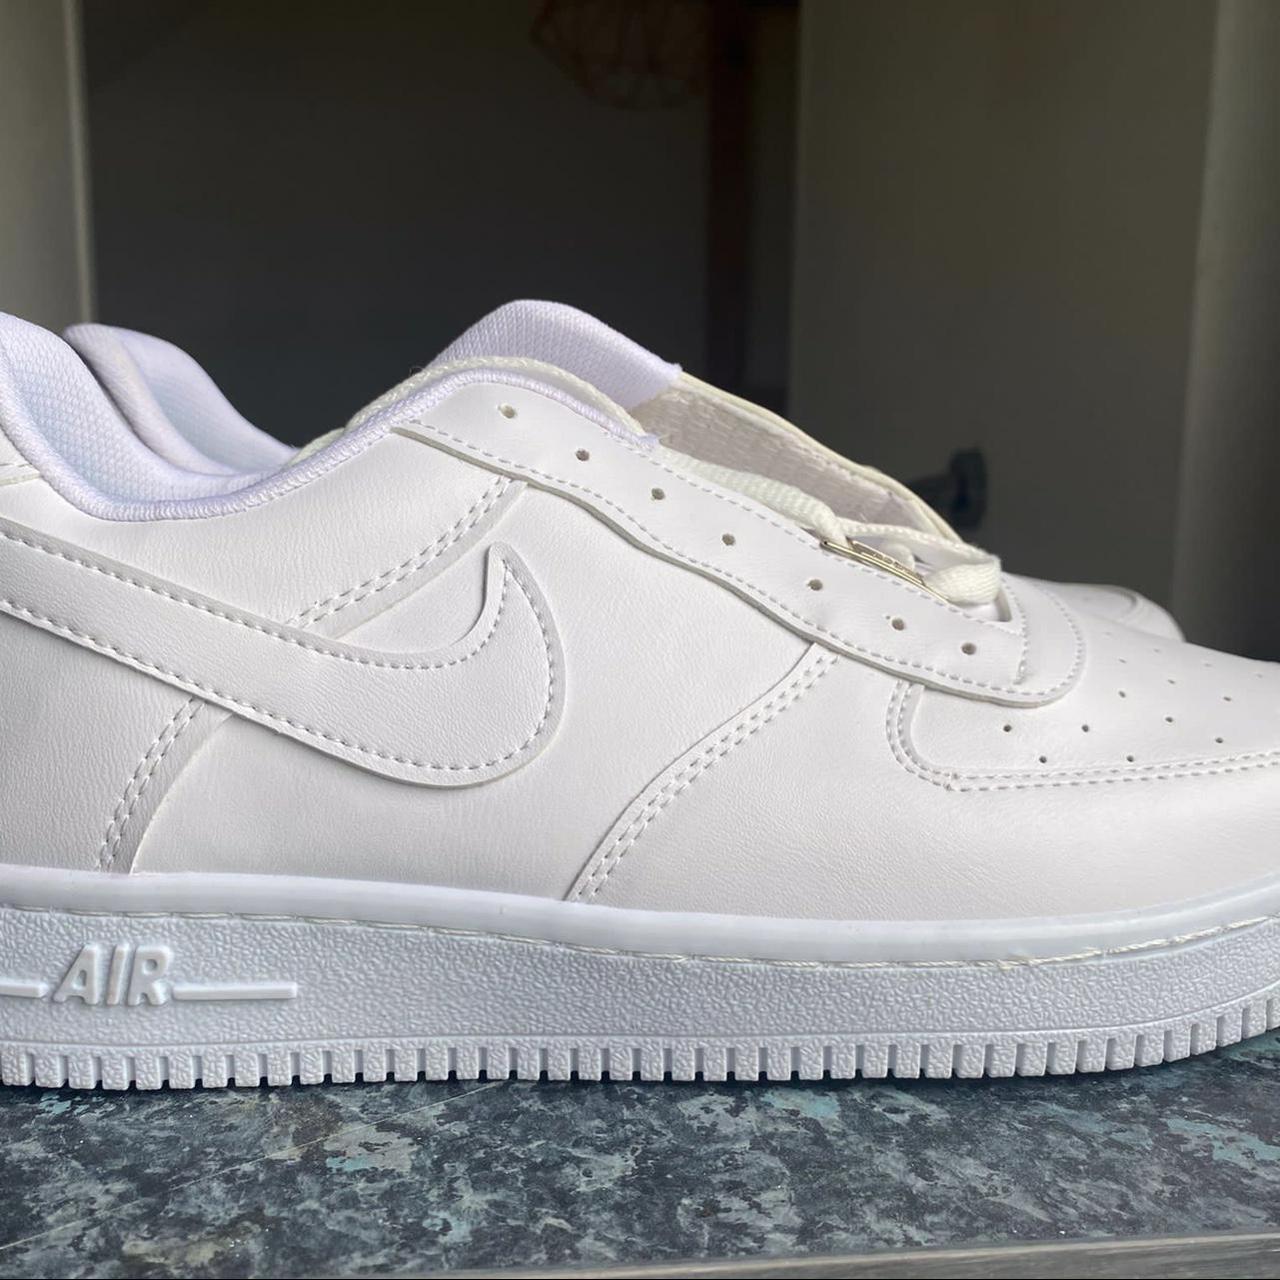 White Nike Airforce 1s 🇺🇸 UK Size 10 (laces included... - Depop